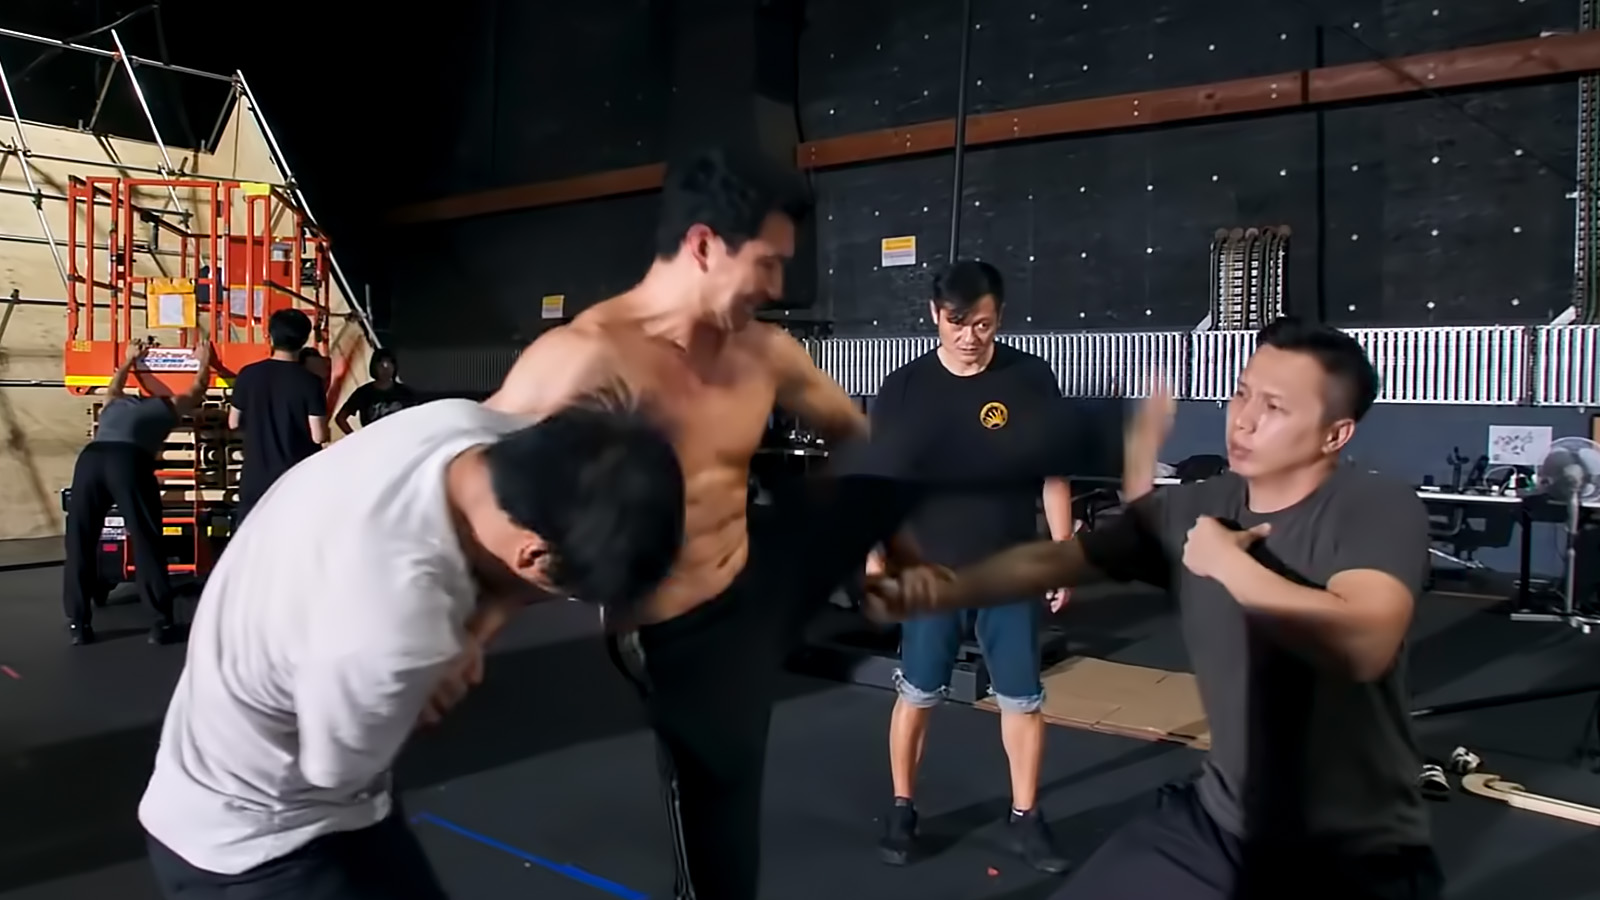 Simu Liu practices his stunt choreography with fight coordinator Andy Cheng in the background.